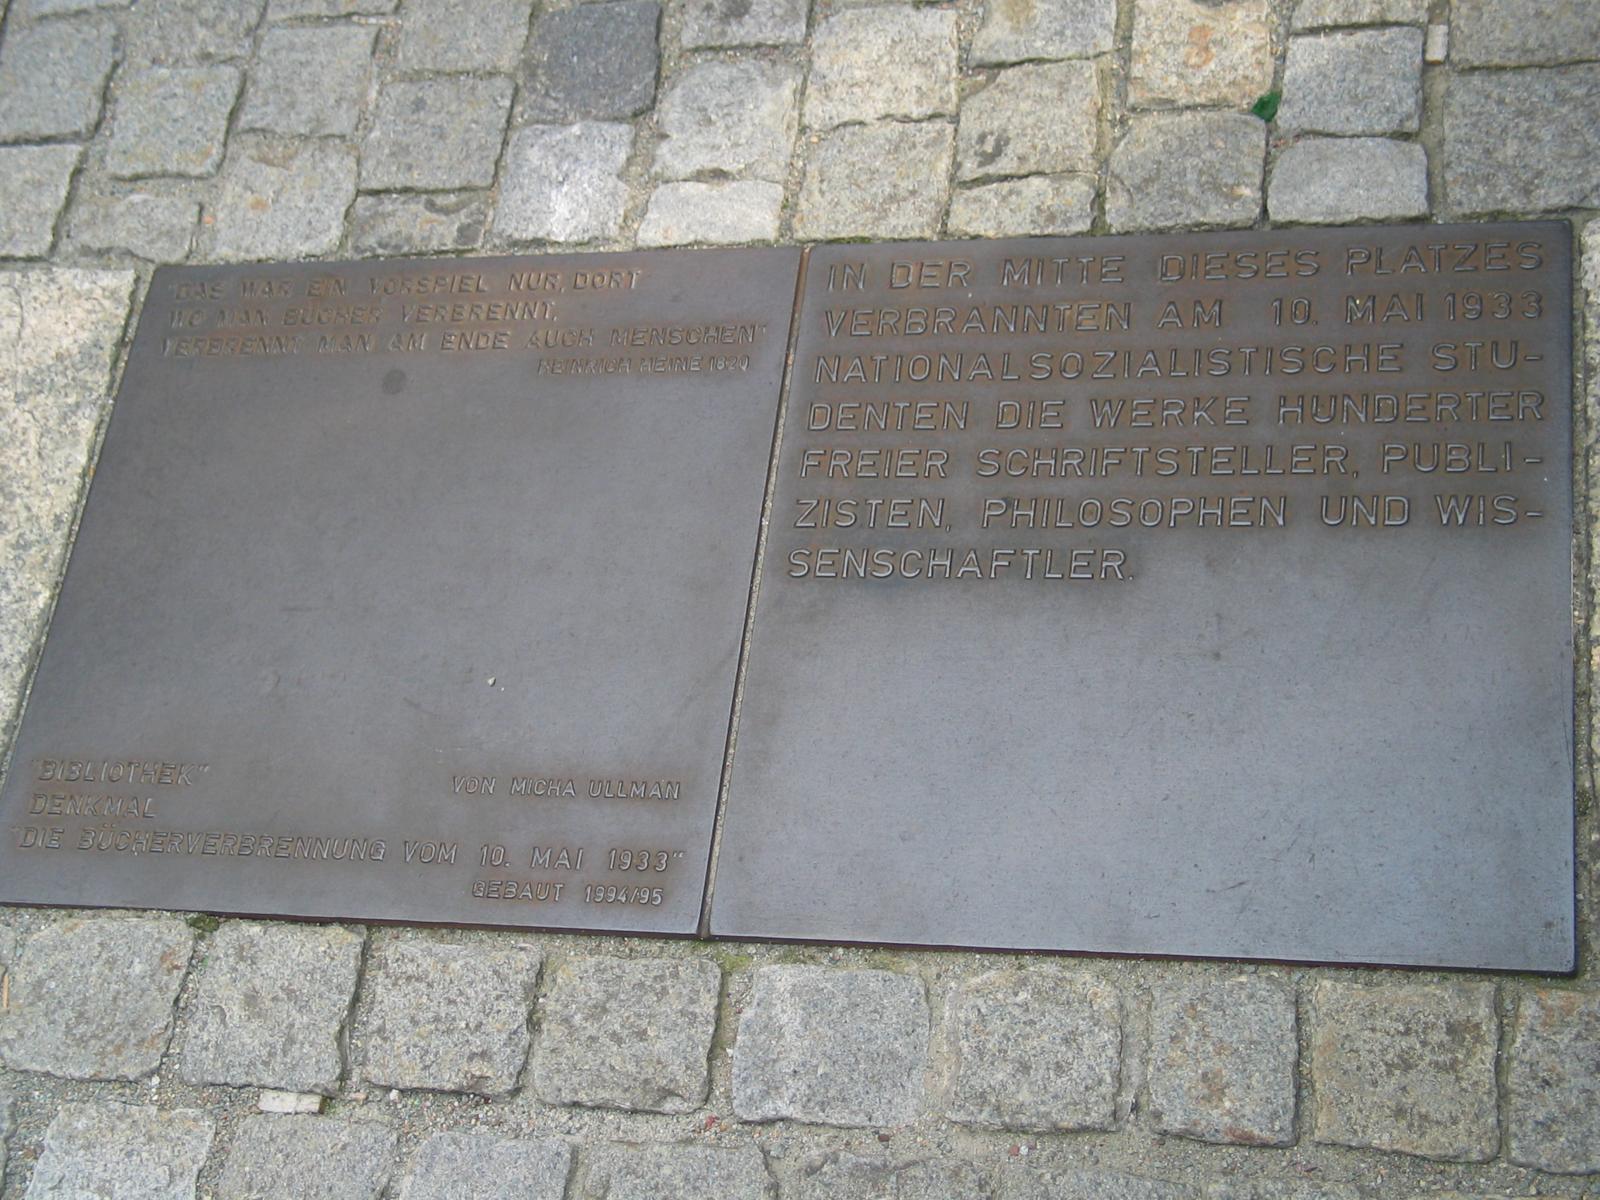 The Book Burning Square